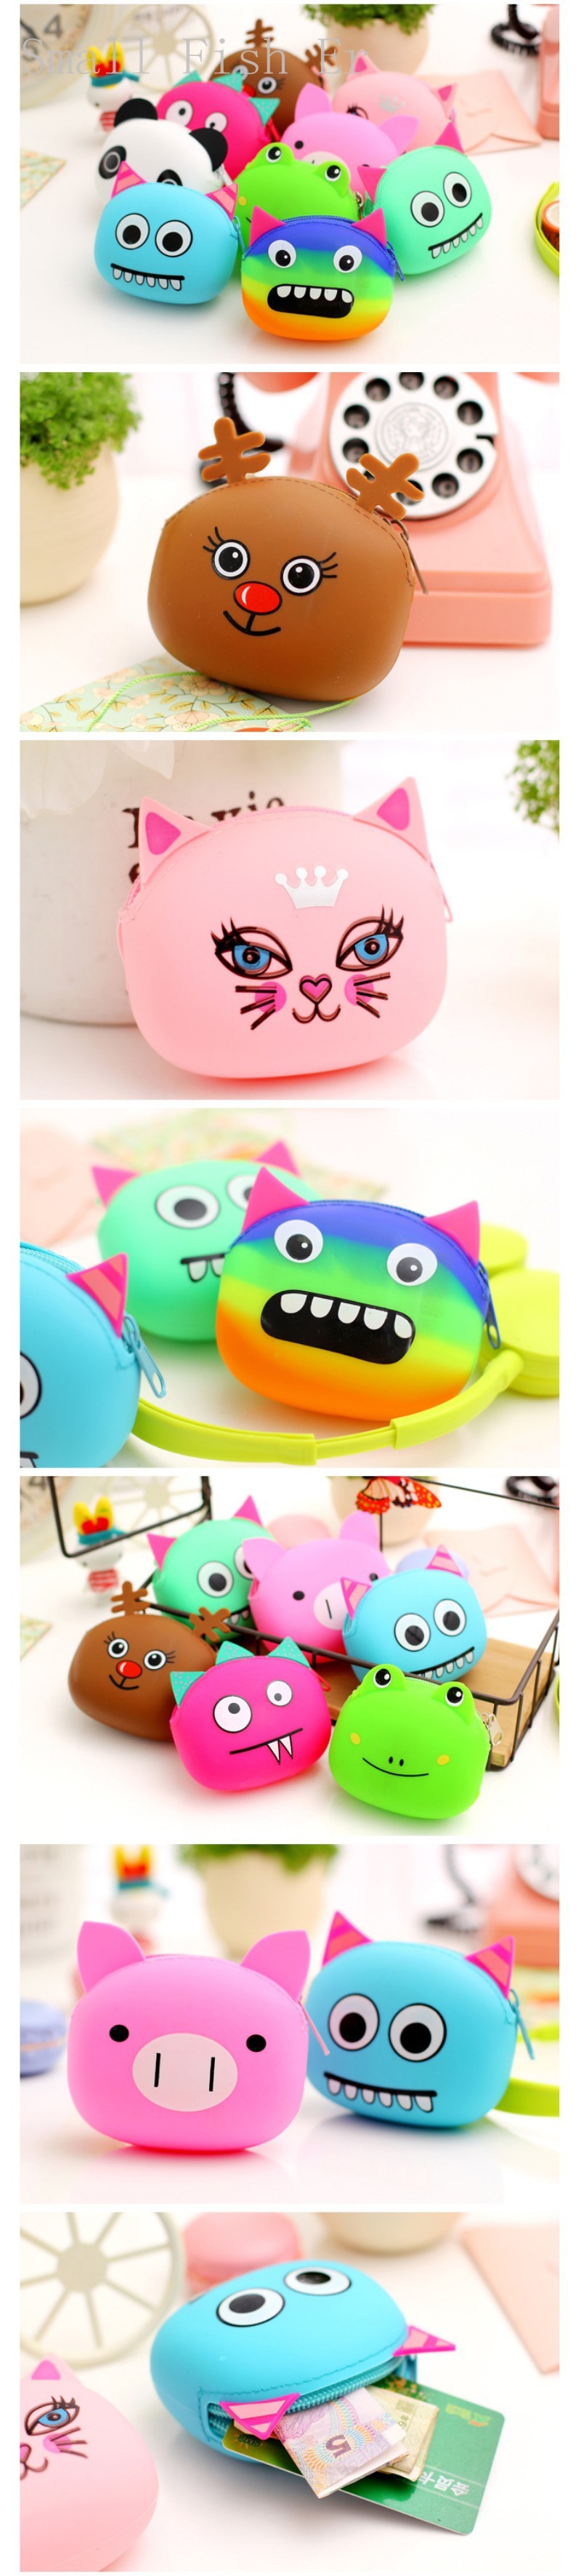 Monster Animal hand coin purse 108.5cm Jelly Rubber Silicone zipper Wallet Bag (2)